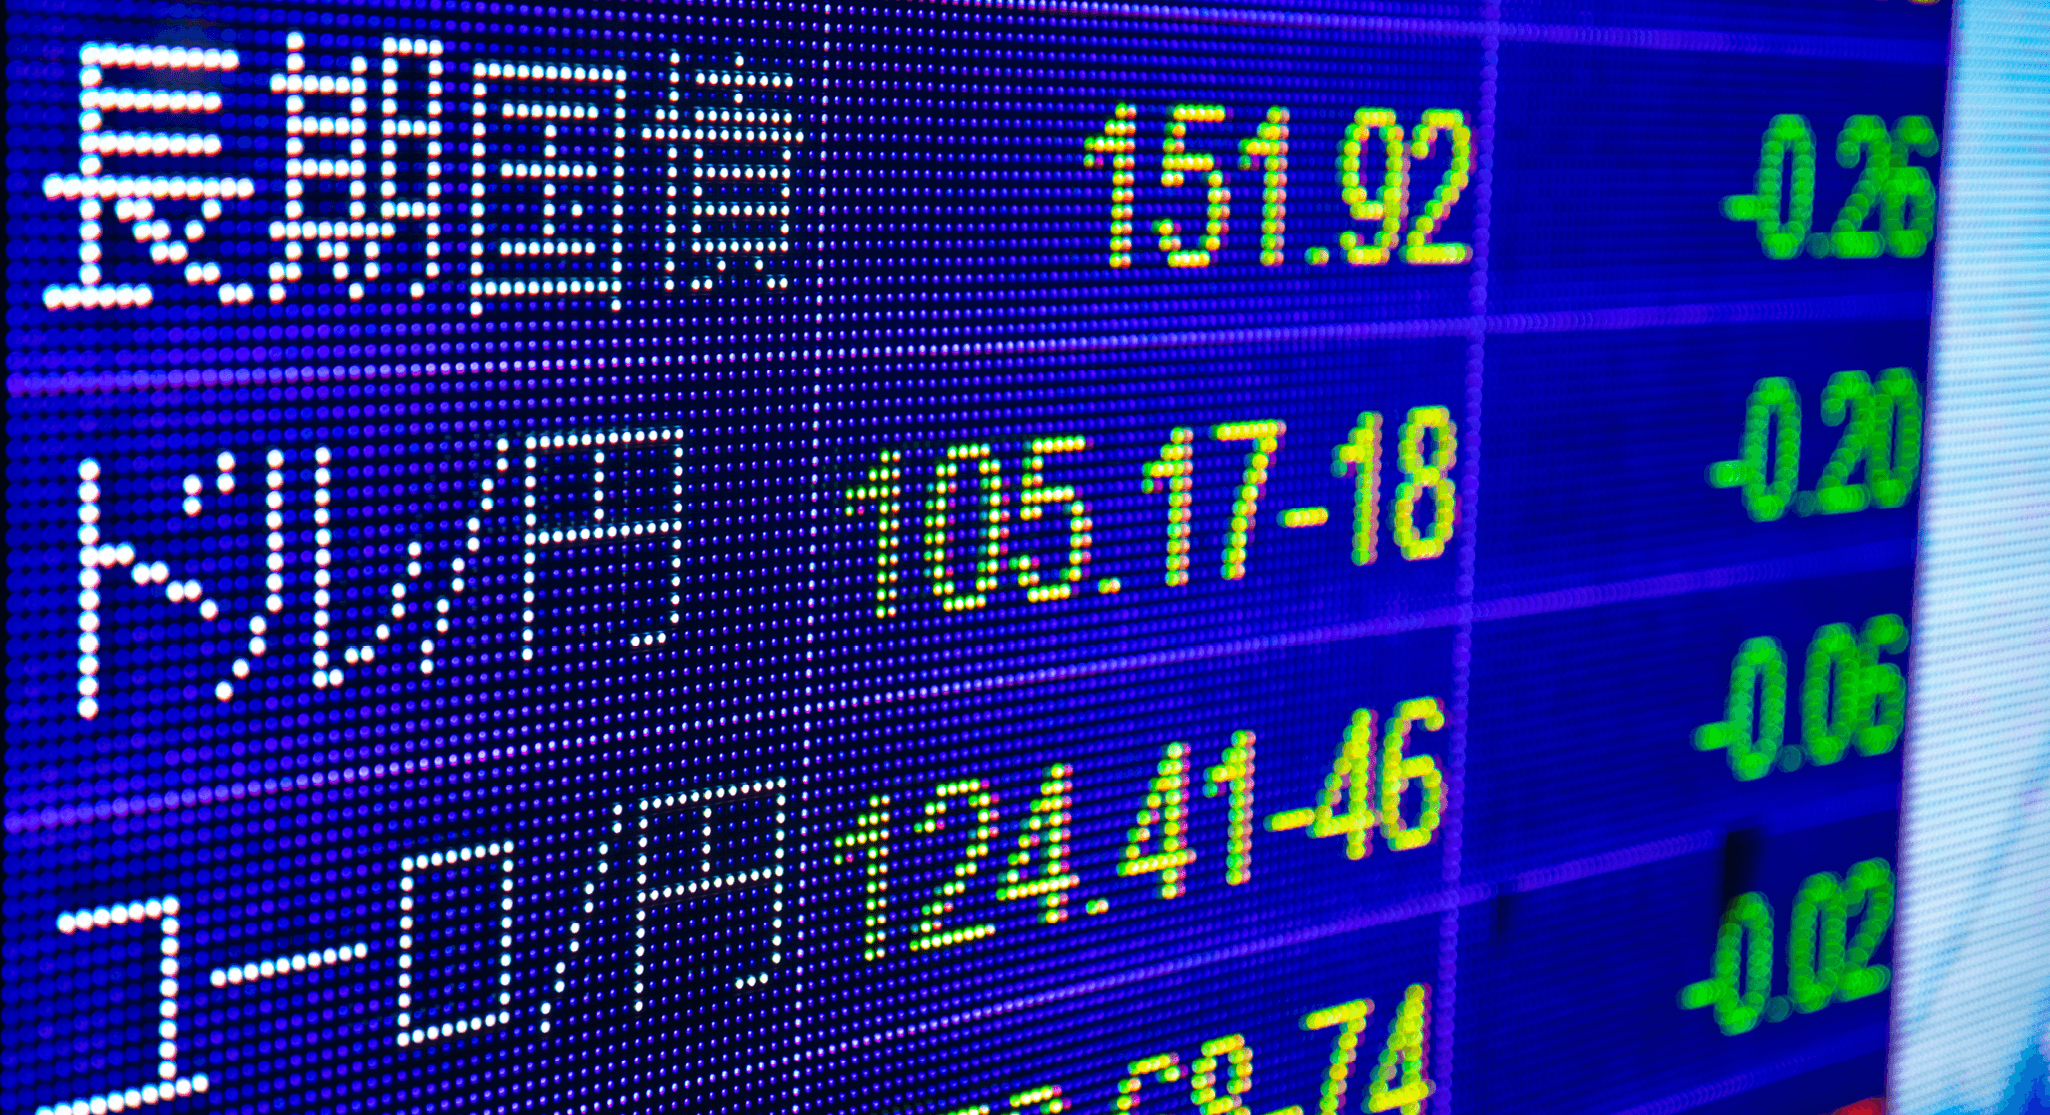 Upcoming changes in the Japanese equities markets